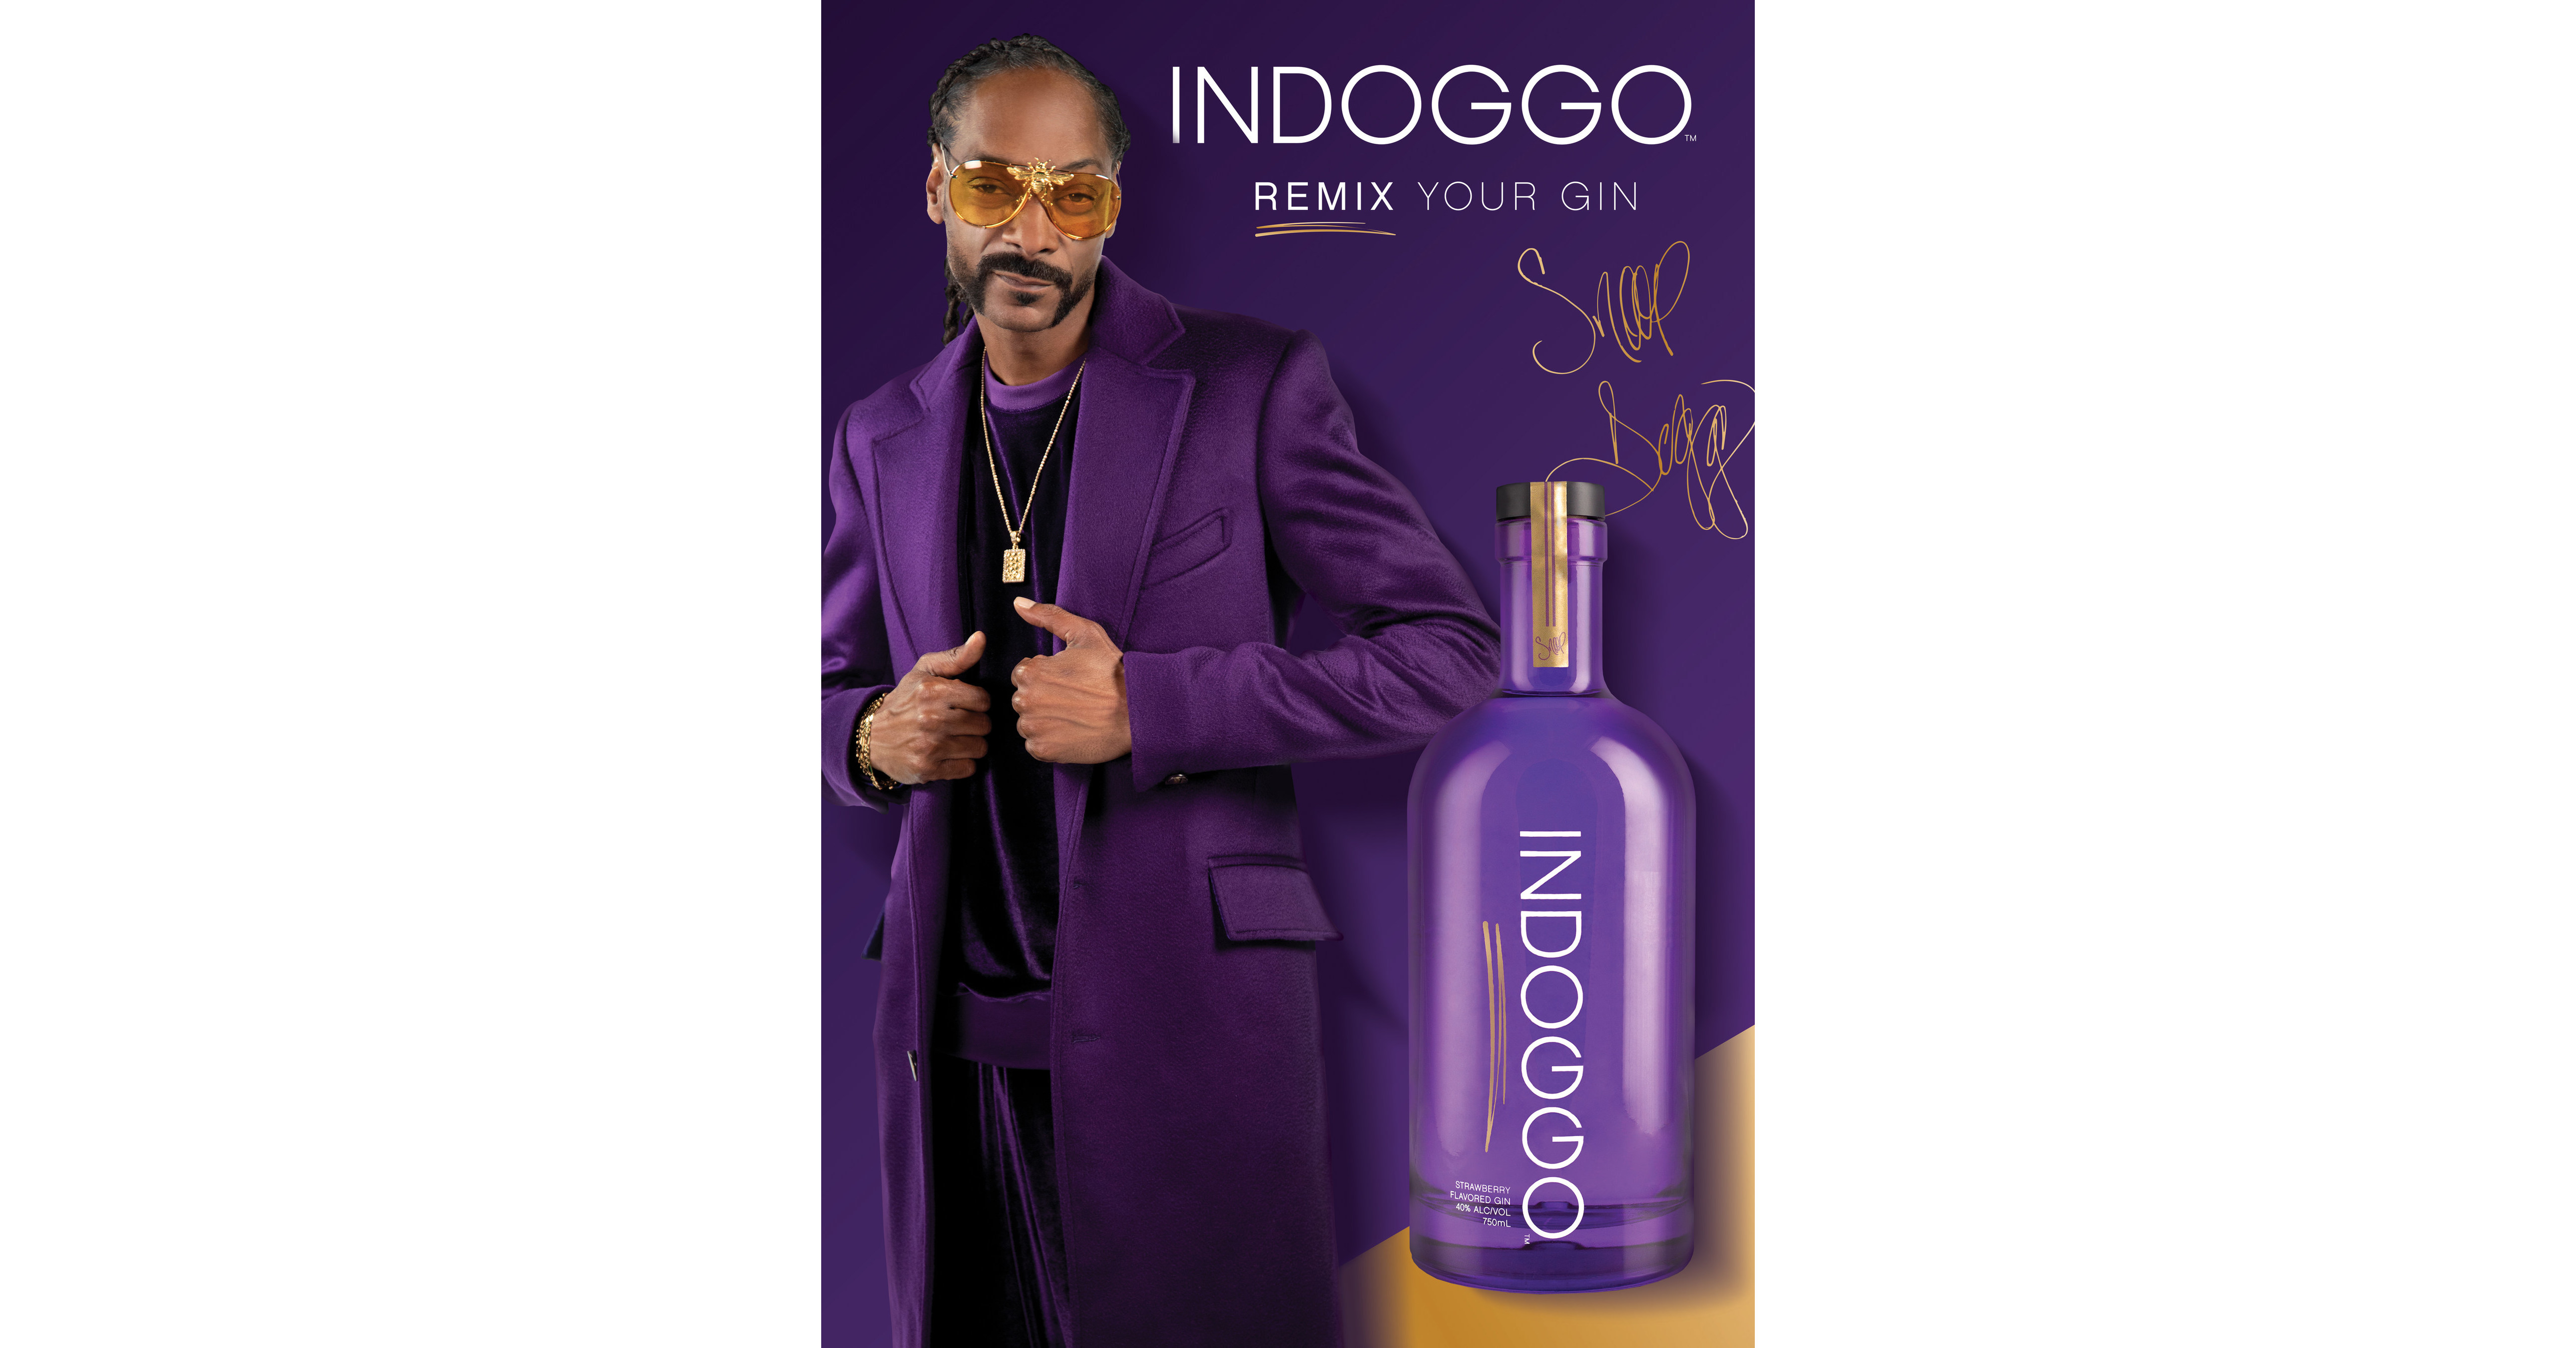 Rapper Snoop Dogg has released a strawberry infused gin called